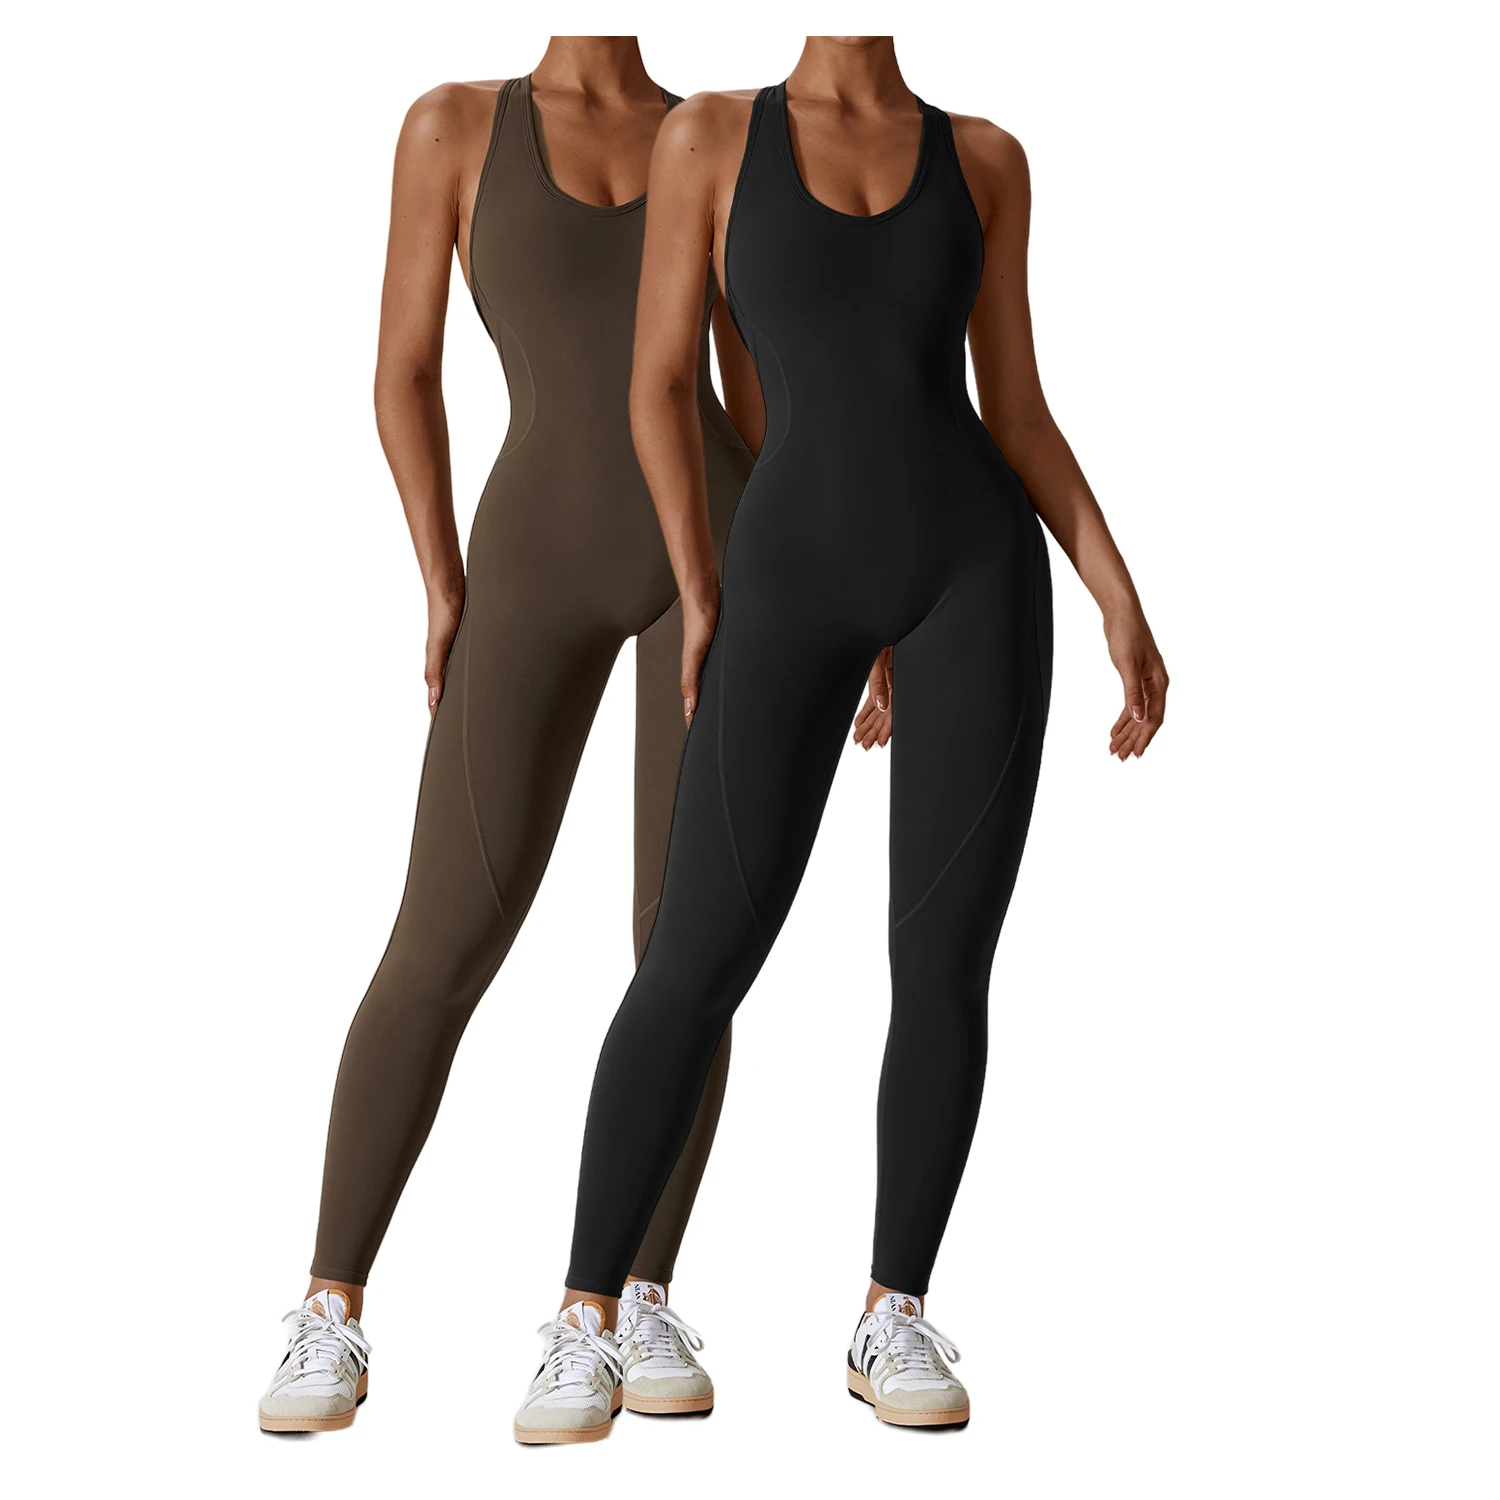 Women Seamless One-Piece Yoga Suit Dance Belly Tightening Fitness Workout Set Stretch Bodysuit Gym Clothes Push Up Sportswear